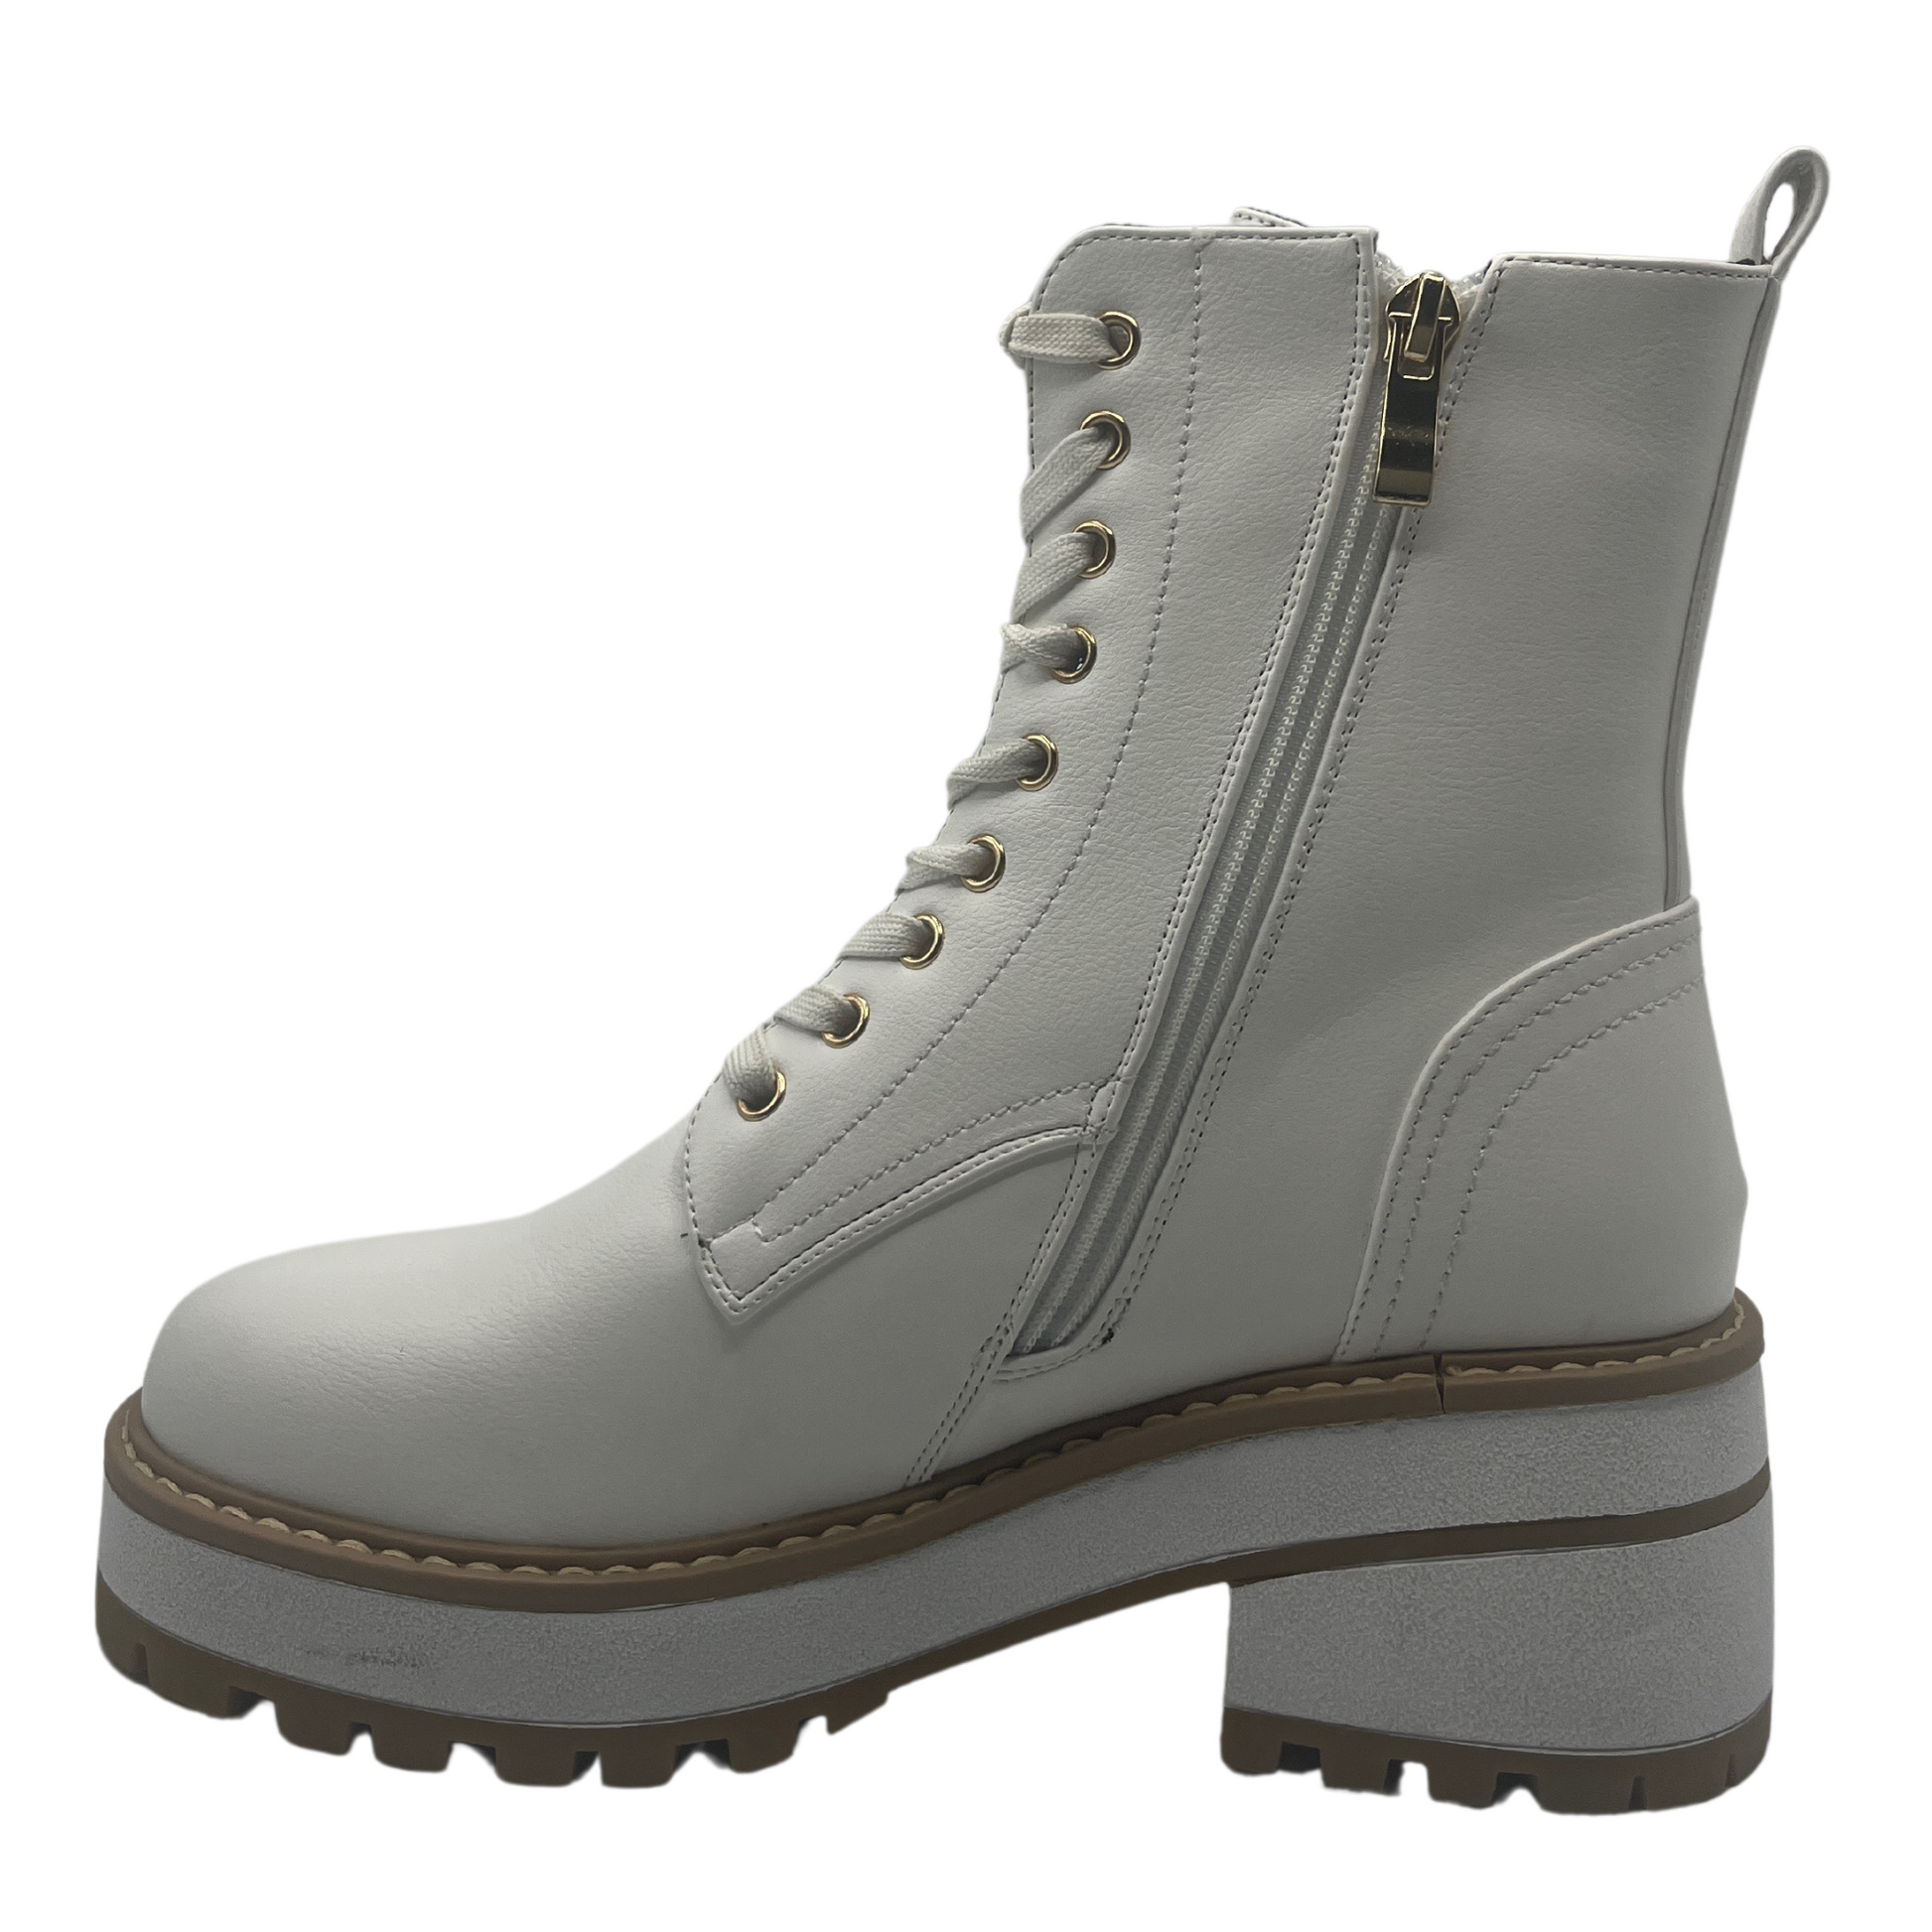 Left facing view of white vegan leather lace up boot with side zipper closure and chunky sole